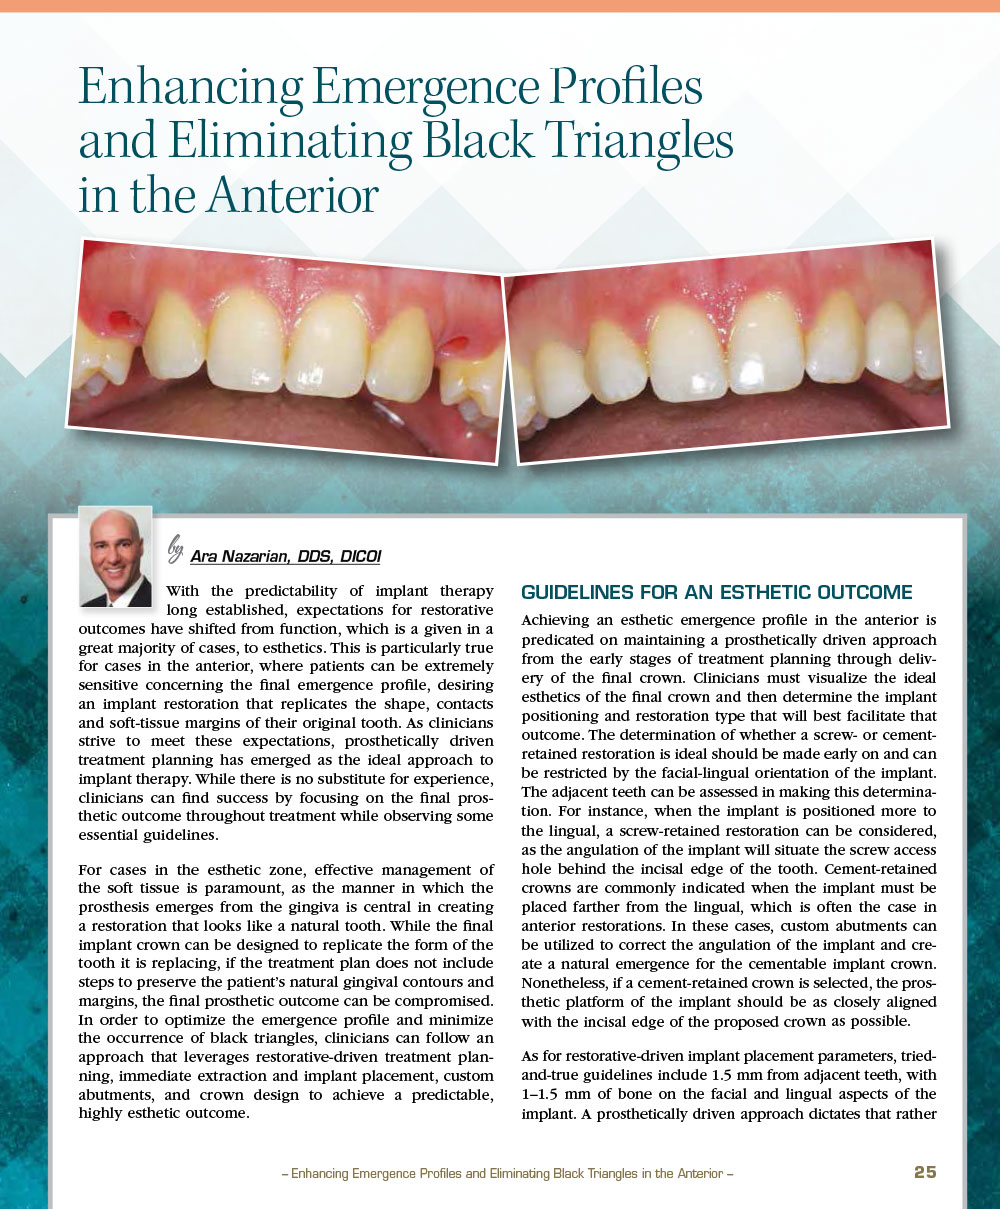 Enhancing Emergence Profiles and Eliminating Black Triangles in the Anterior